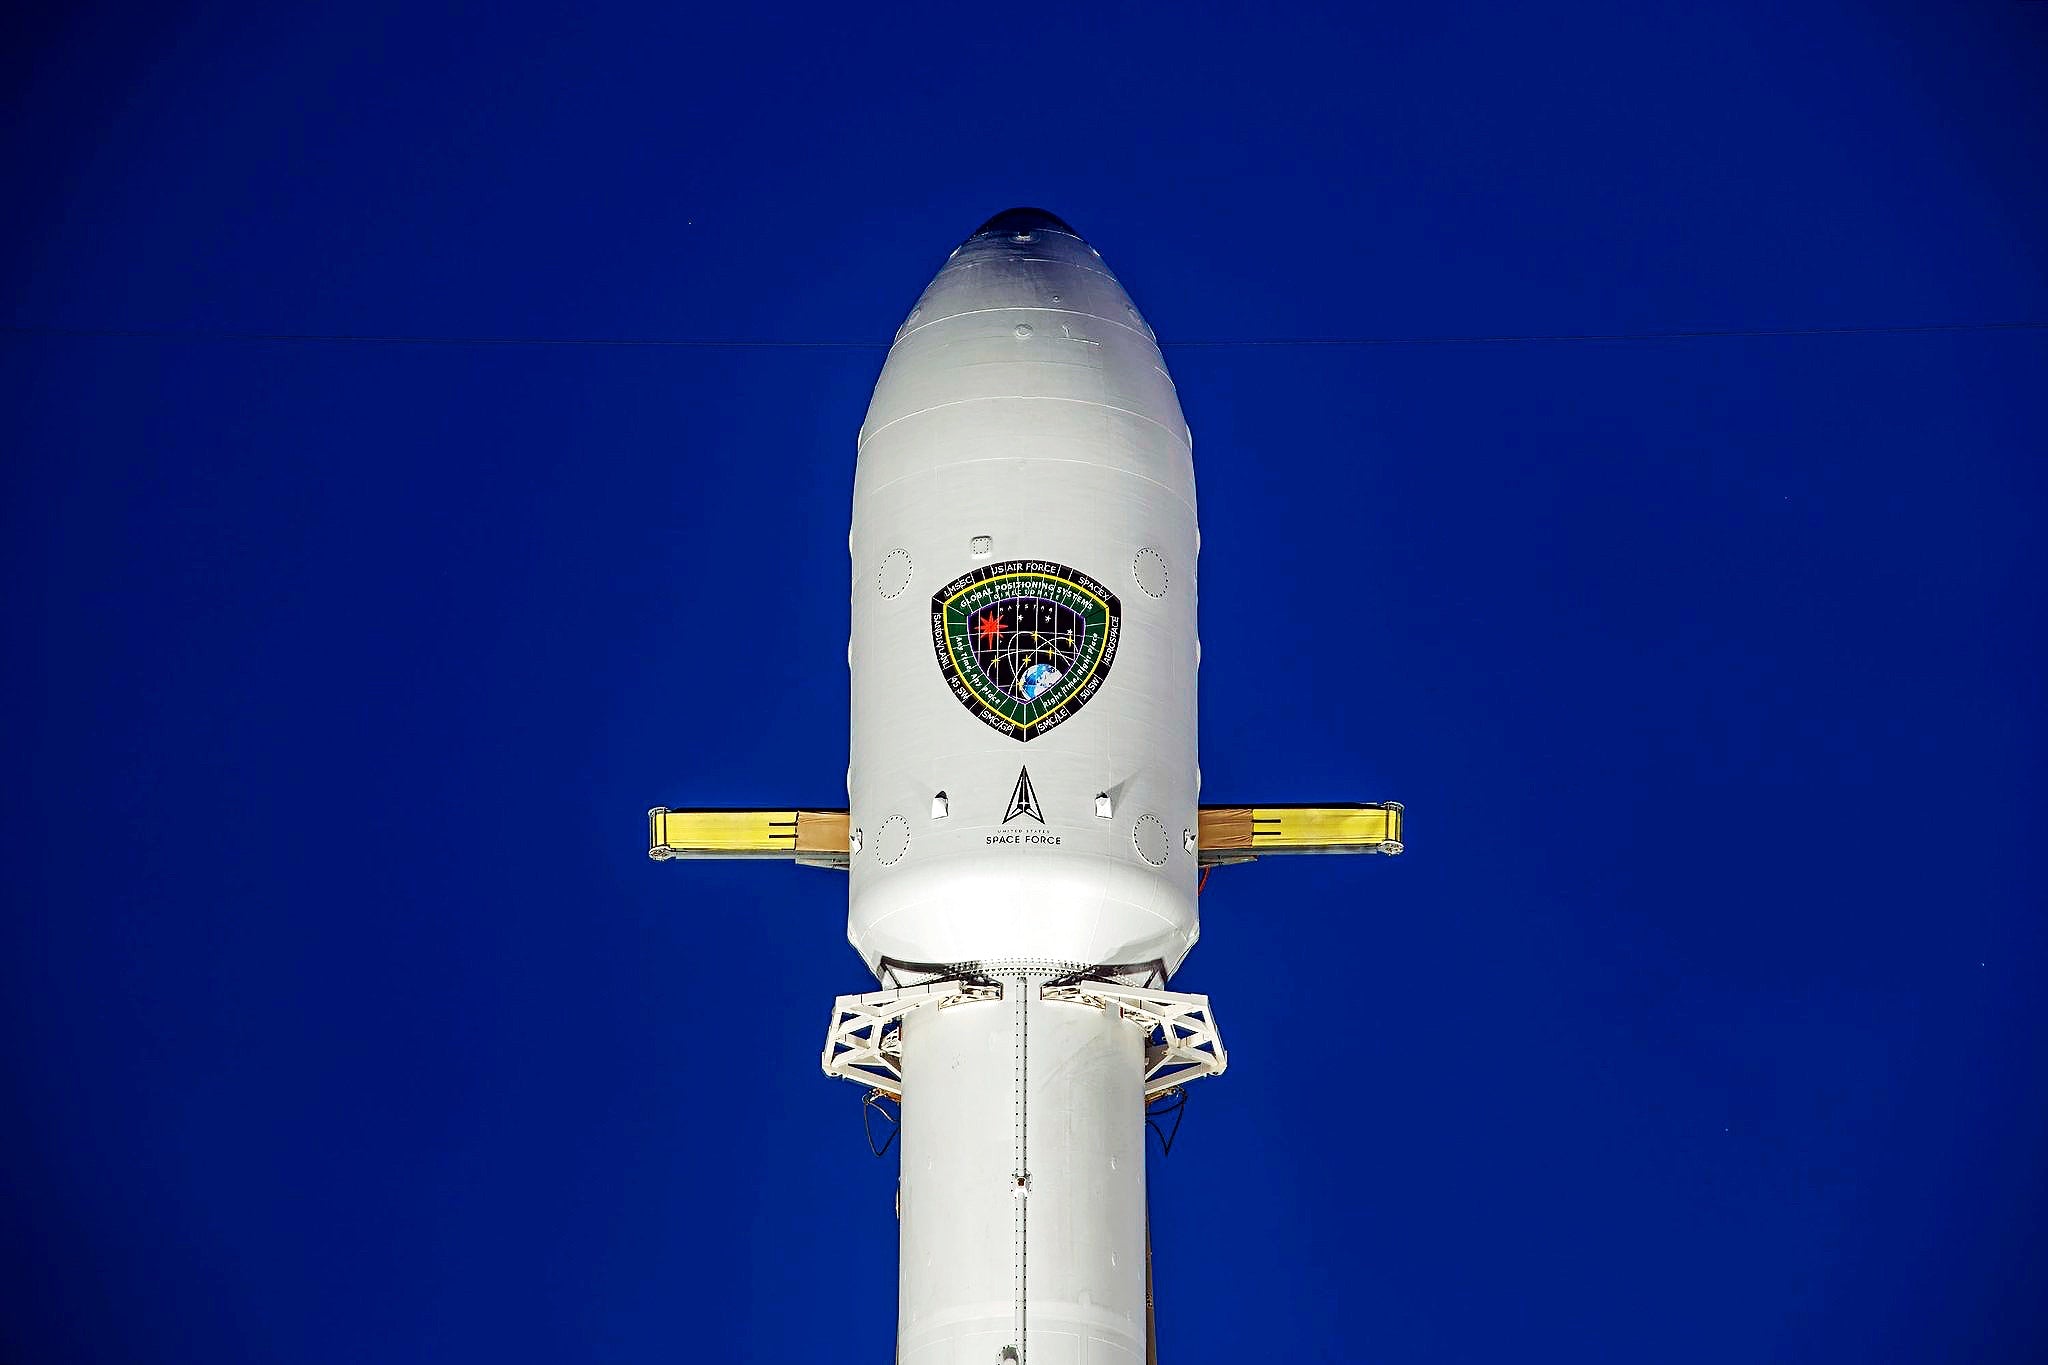 SpaceX fixes Falcon 9 for the U.S. Space Force GPS-III mission